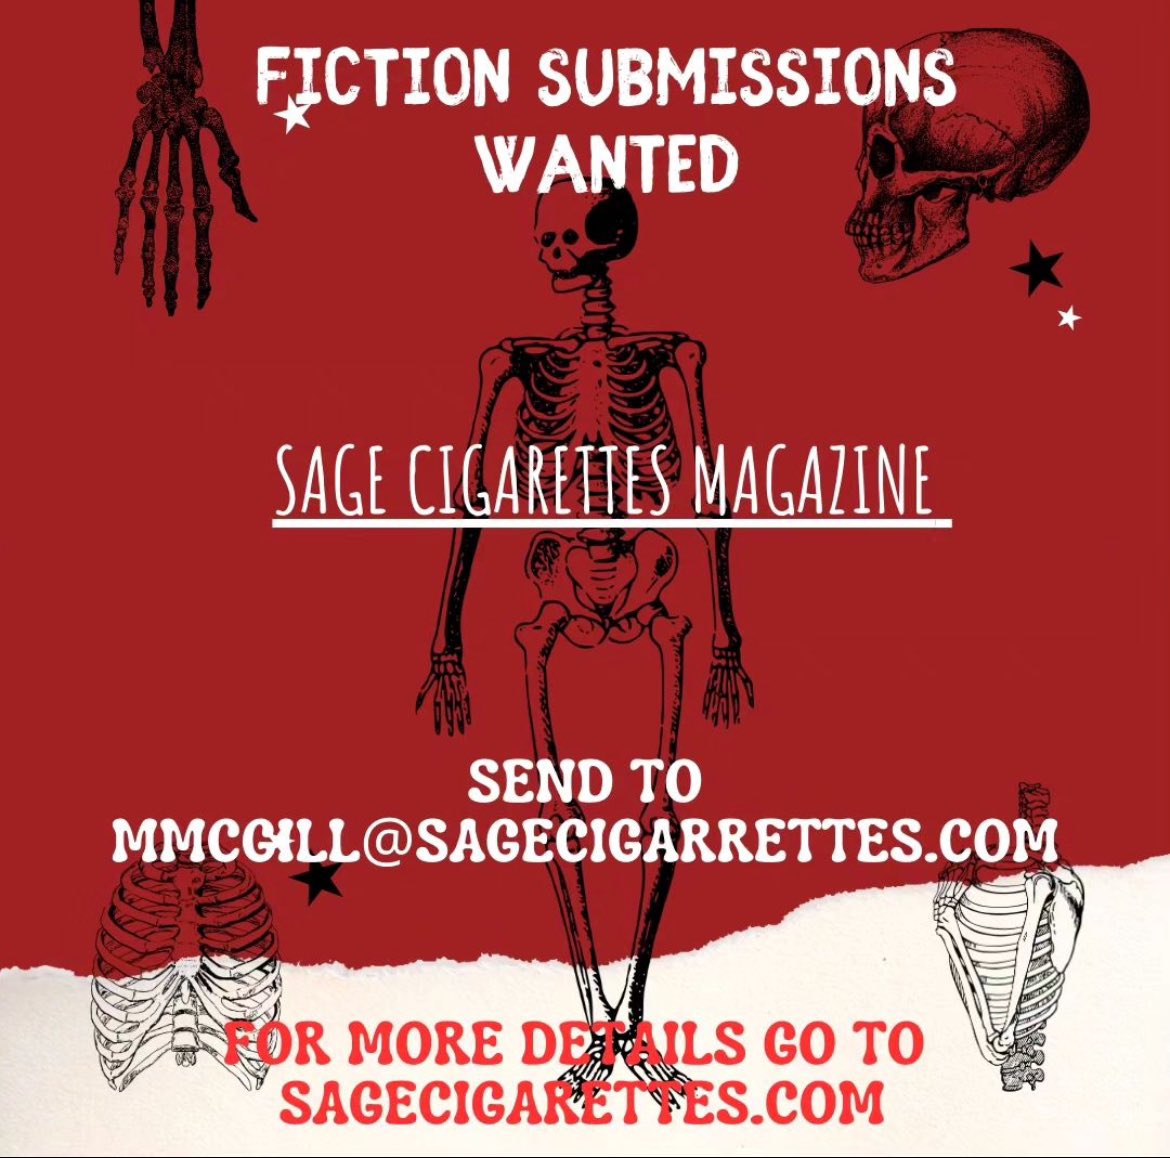 We want you to FILL @Night_TimeTea’s inbox with your stories and #fiction this weekend!